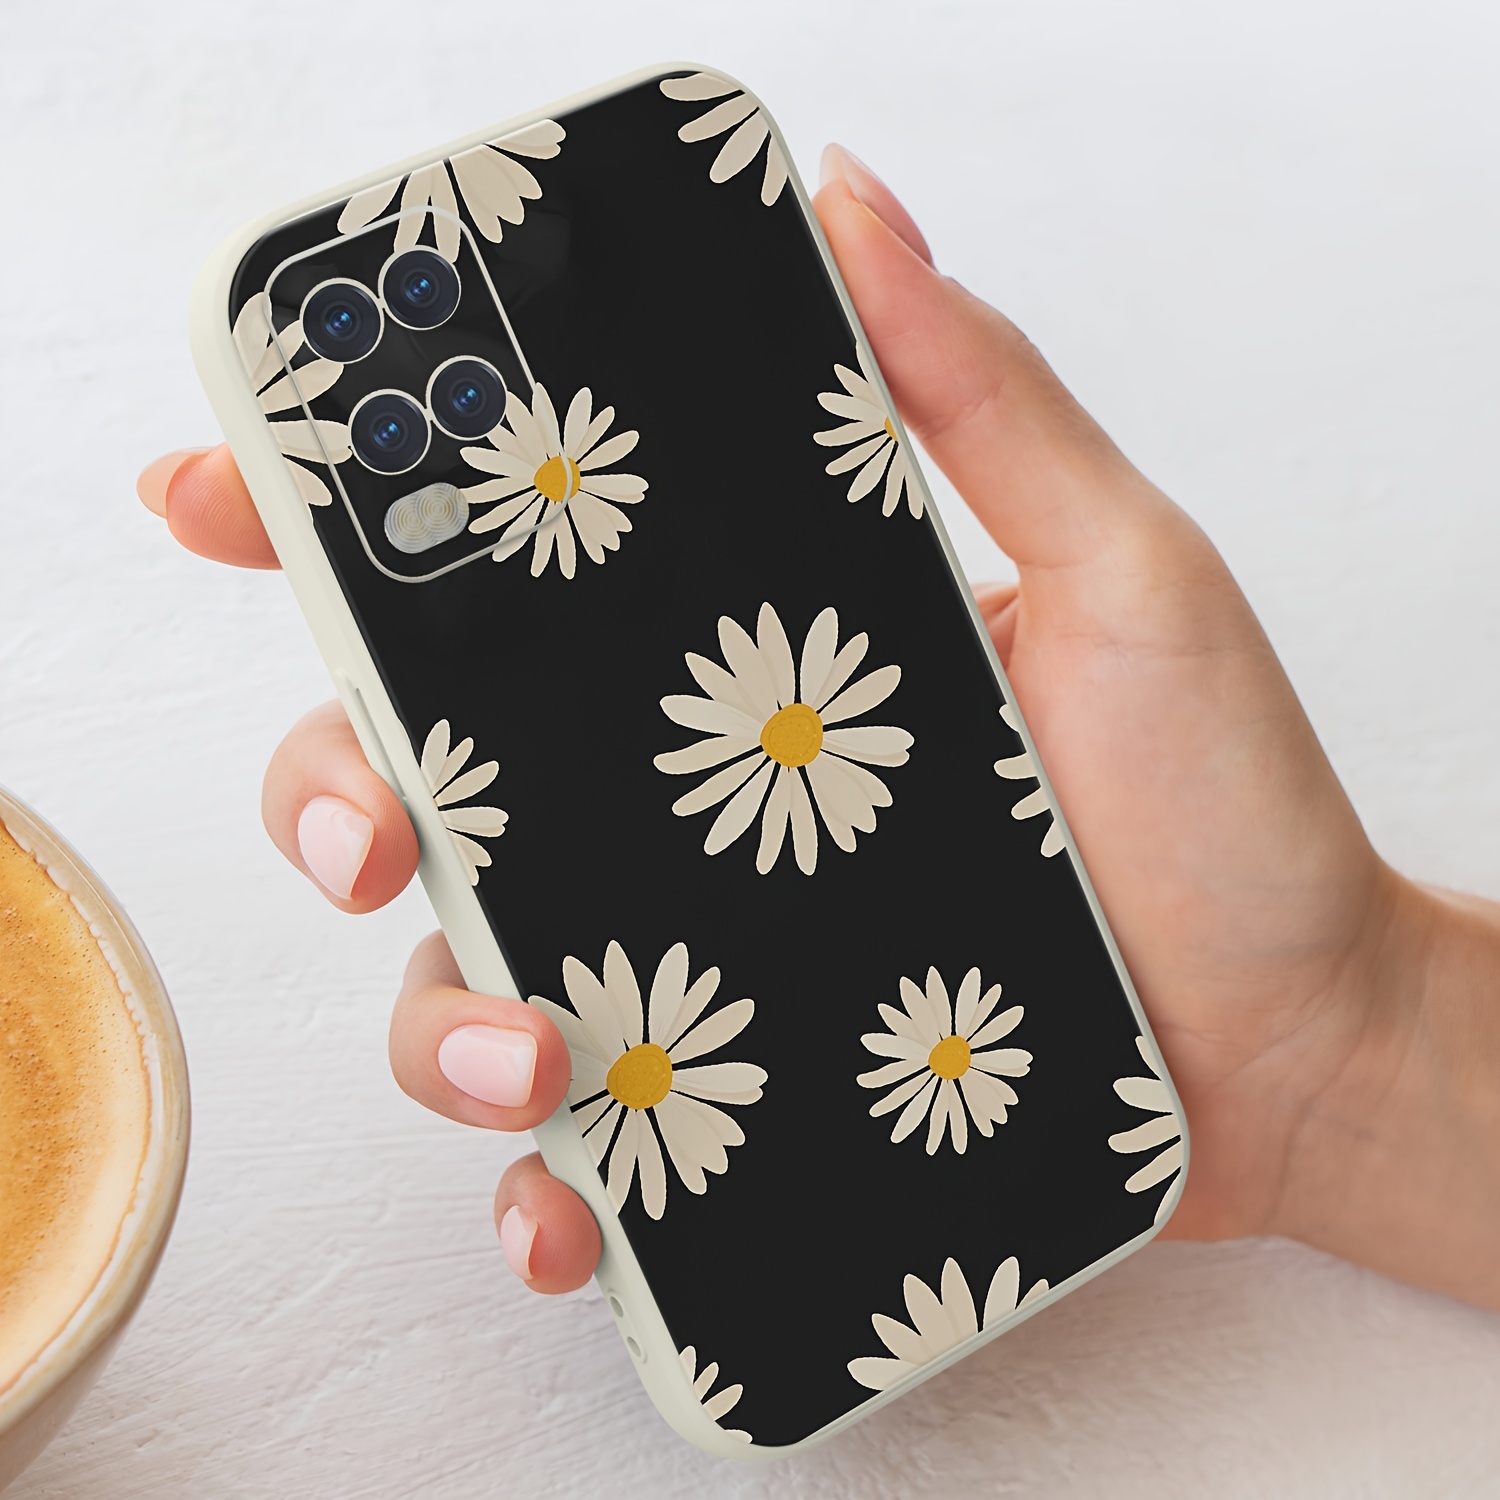 

Black Bottom White Flower Small Daisy Pattern For Oppo Realme A C F I L Q S X Rpo Reno Lite 2020 2021 Realmex Superzoon 2 3 4 5 6 7 8 9 10 11 12 15 17 20 21 35 4g 5g Tpu Material Phone Case